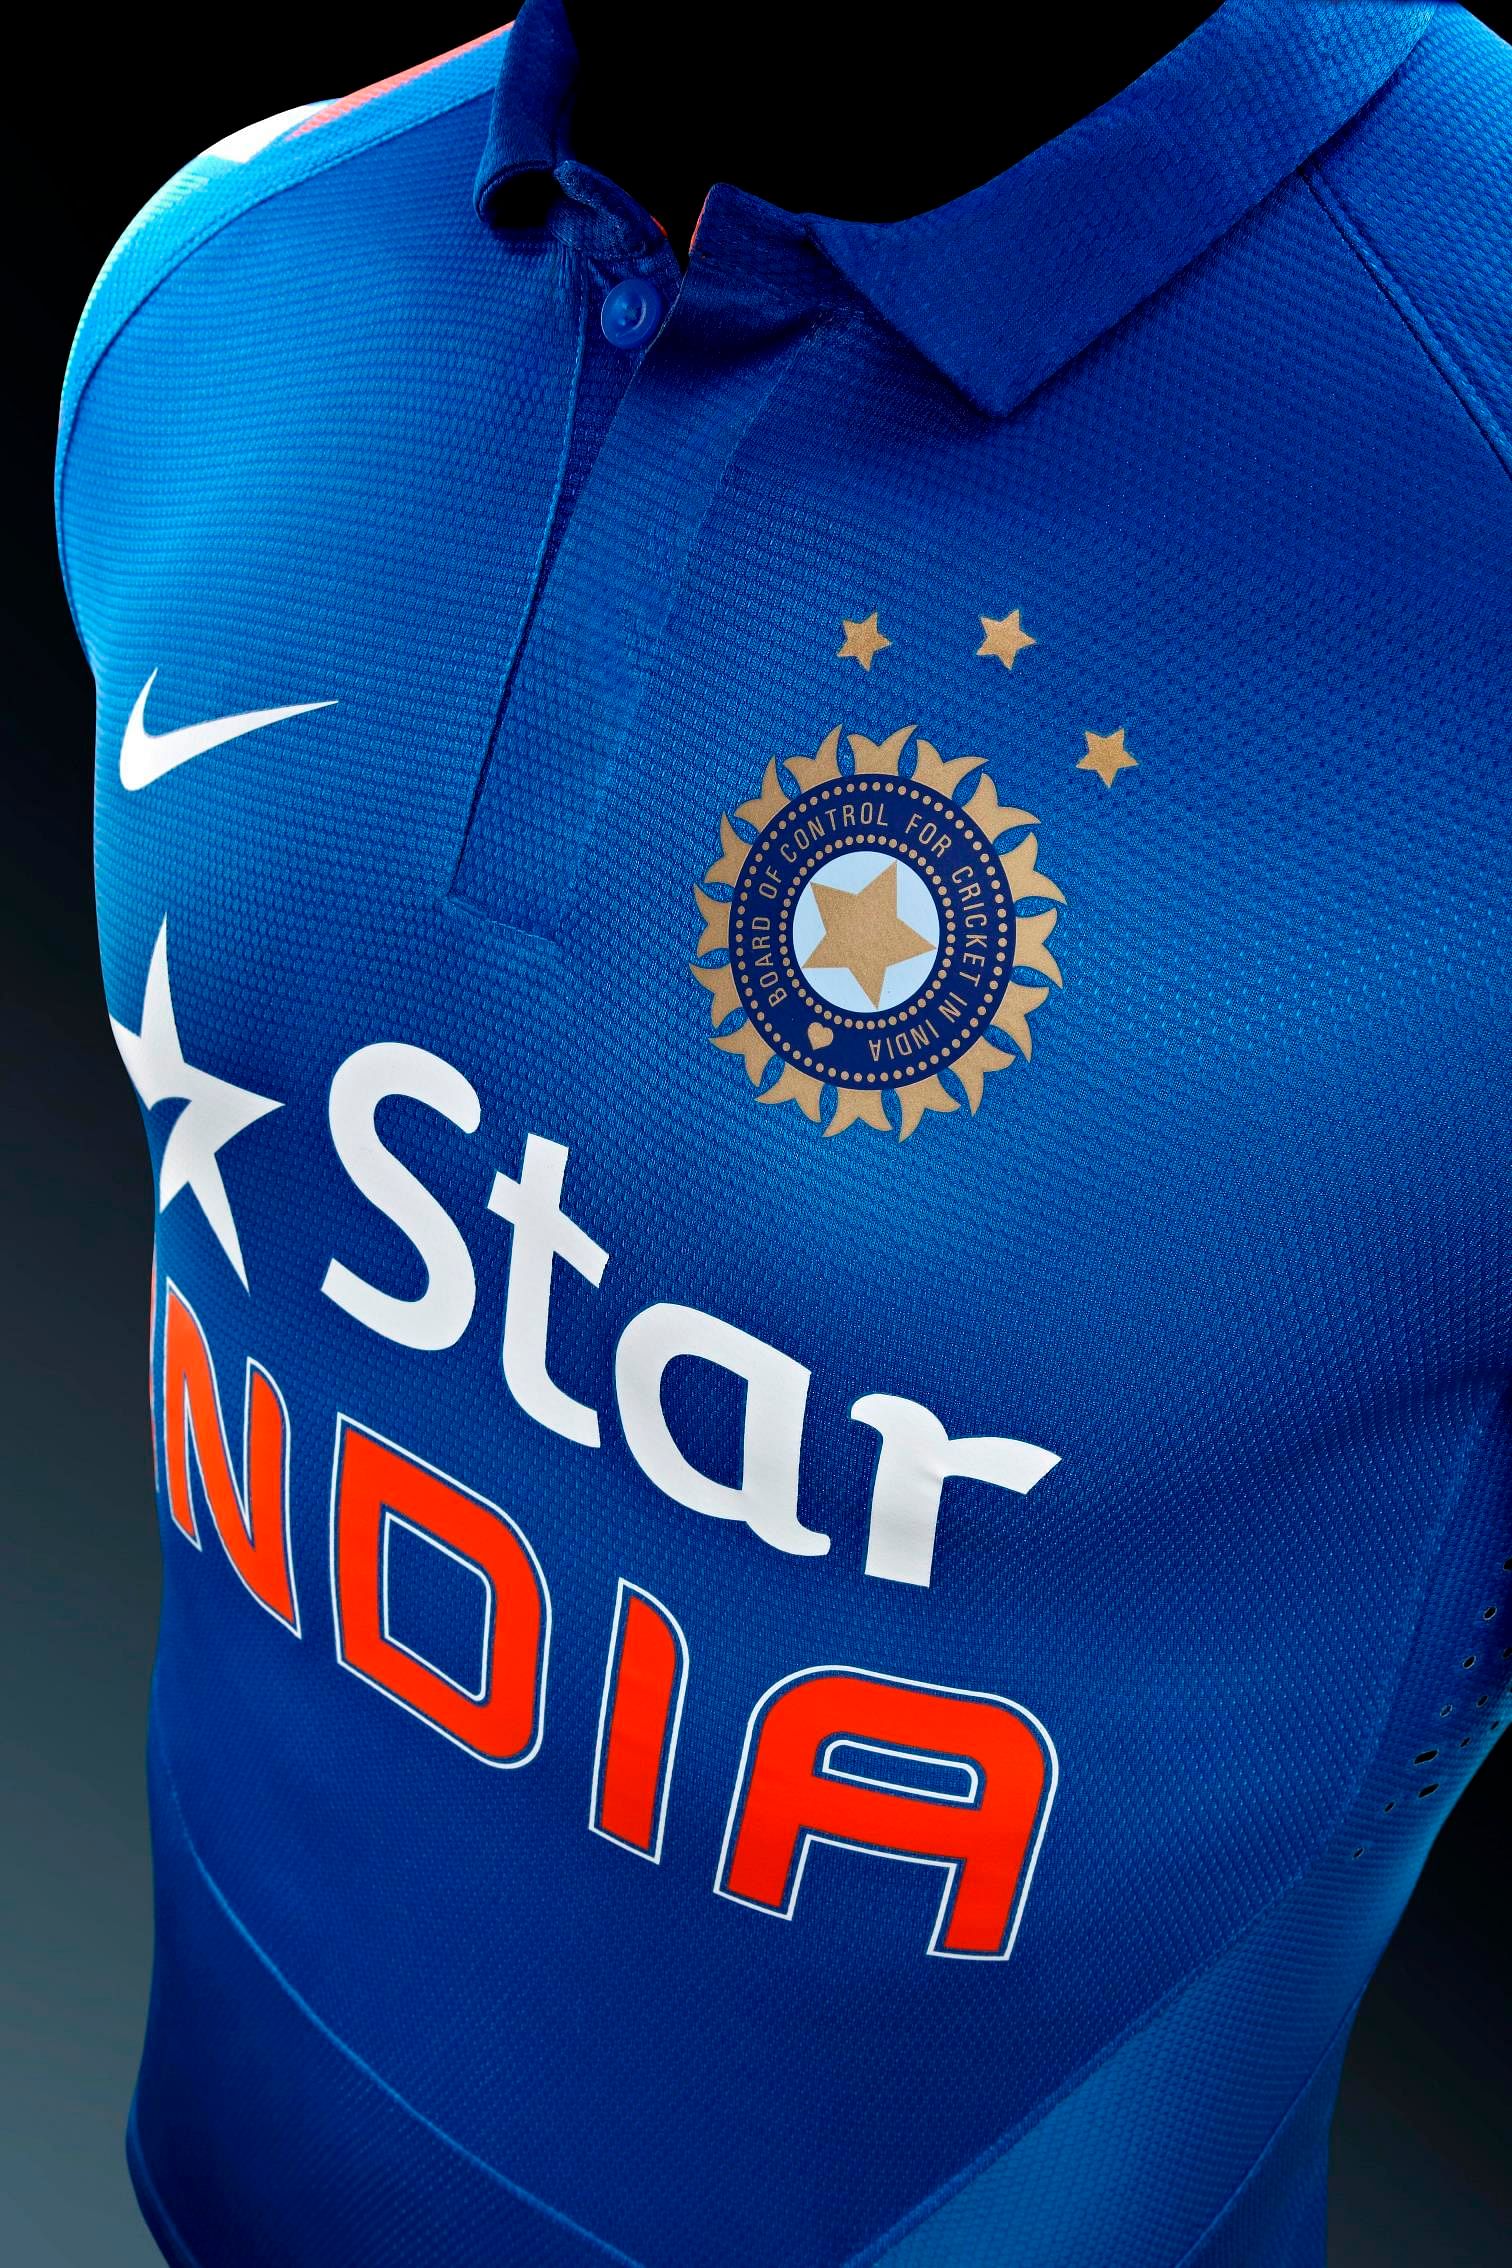 Nike Cricket unveils new Team India Jersey